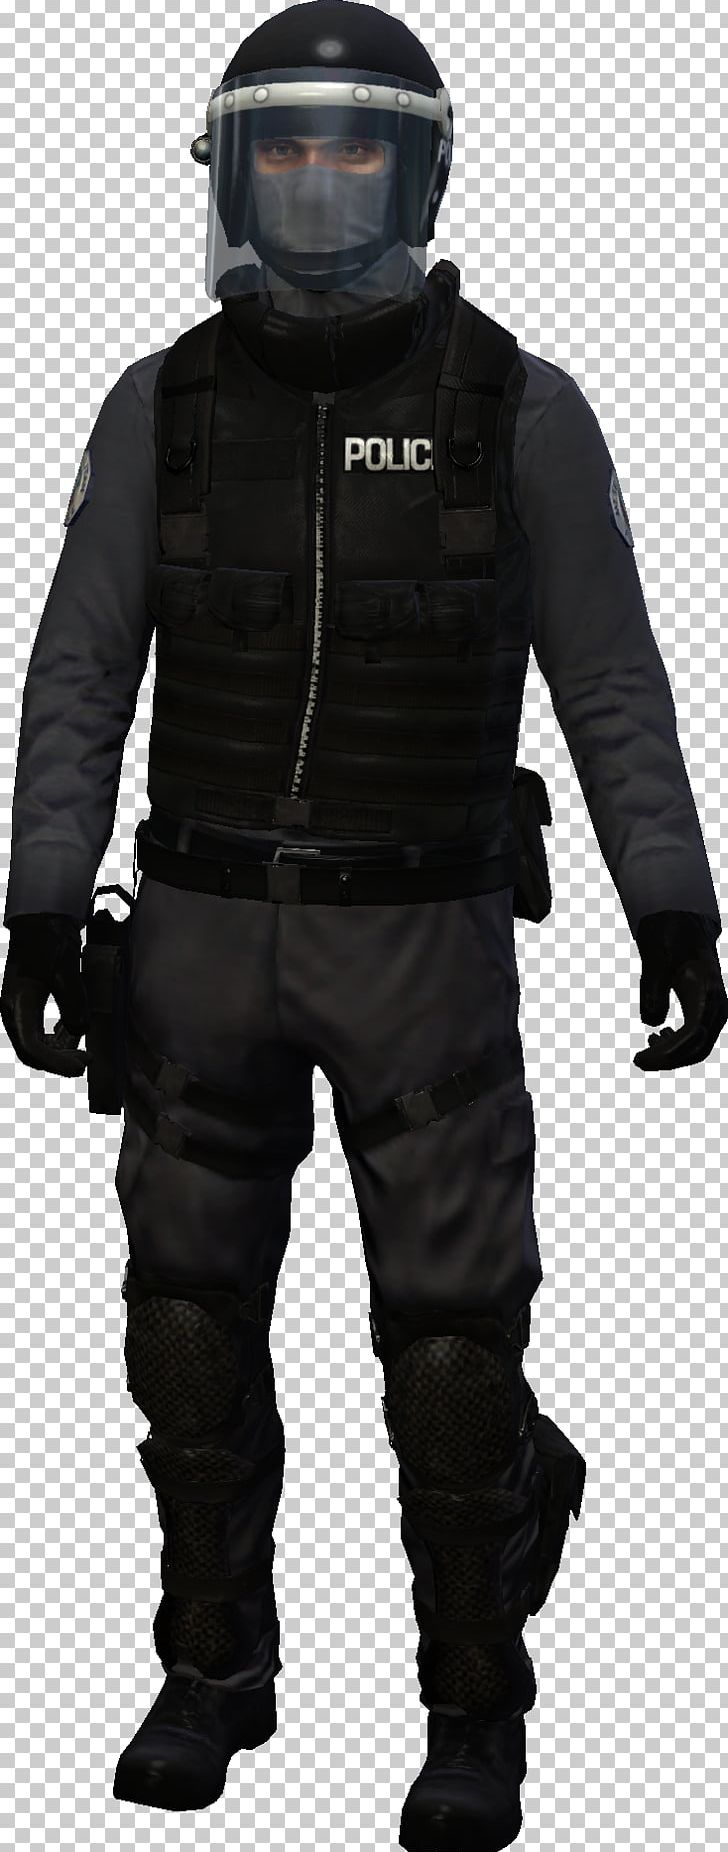 SWAT Uniform Police Jacket Pants PNG, Clipart, Clothing, Clothing Accessories, Costume, Dry Suit, Helmet Free PNG Download